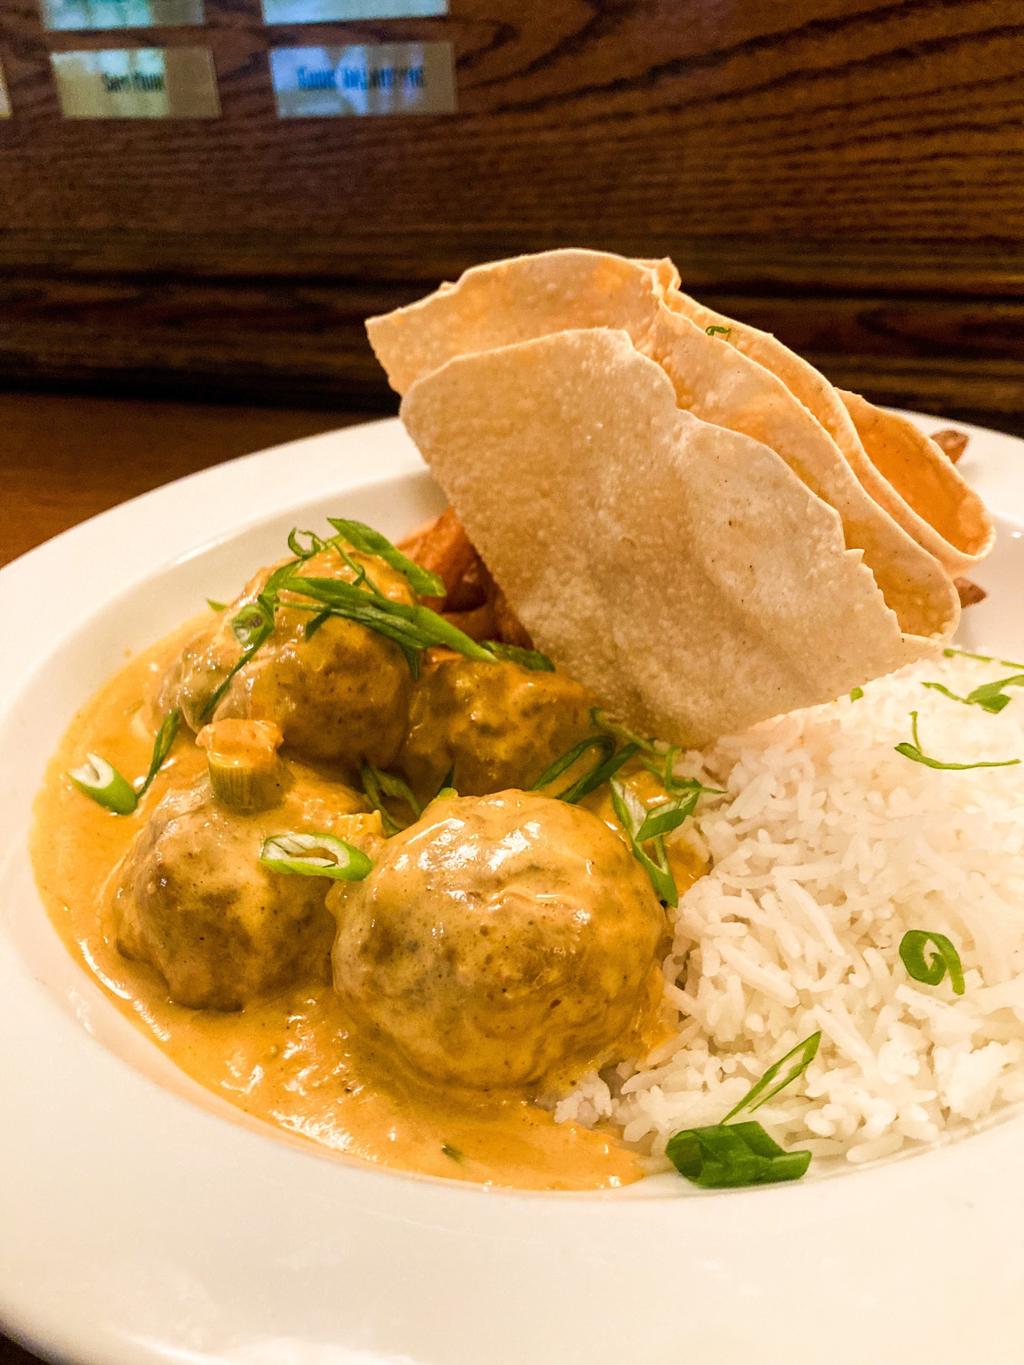 Thursday curry of the Day - June 13th